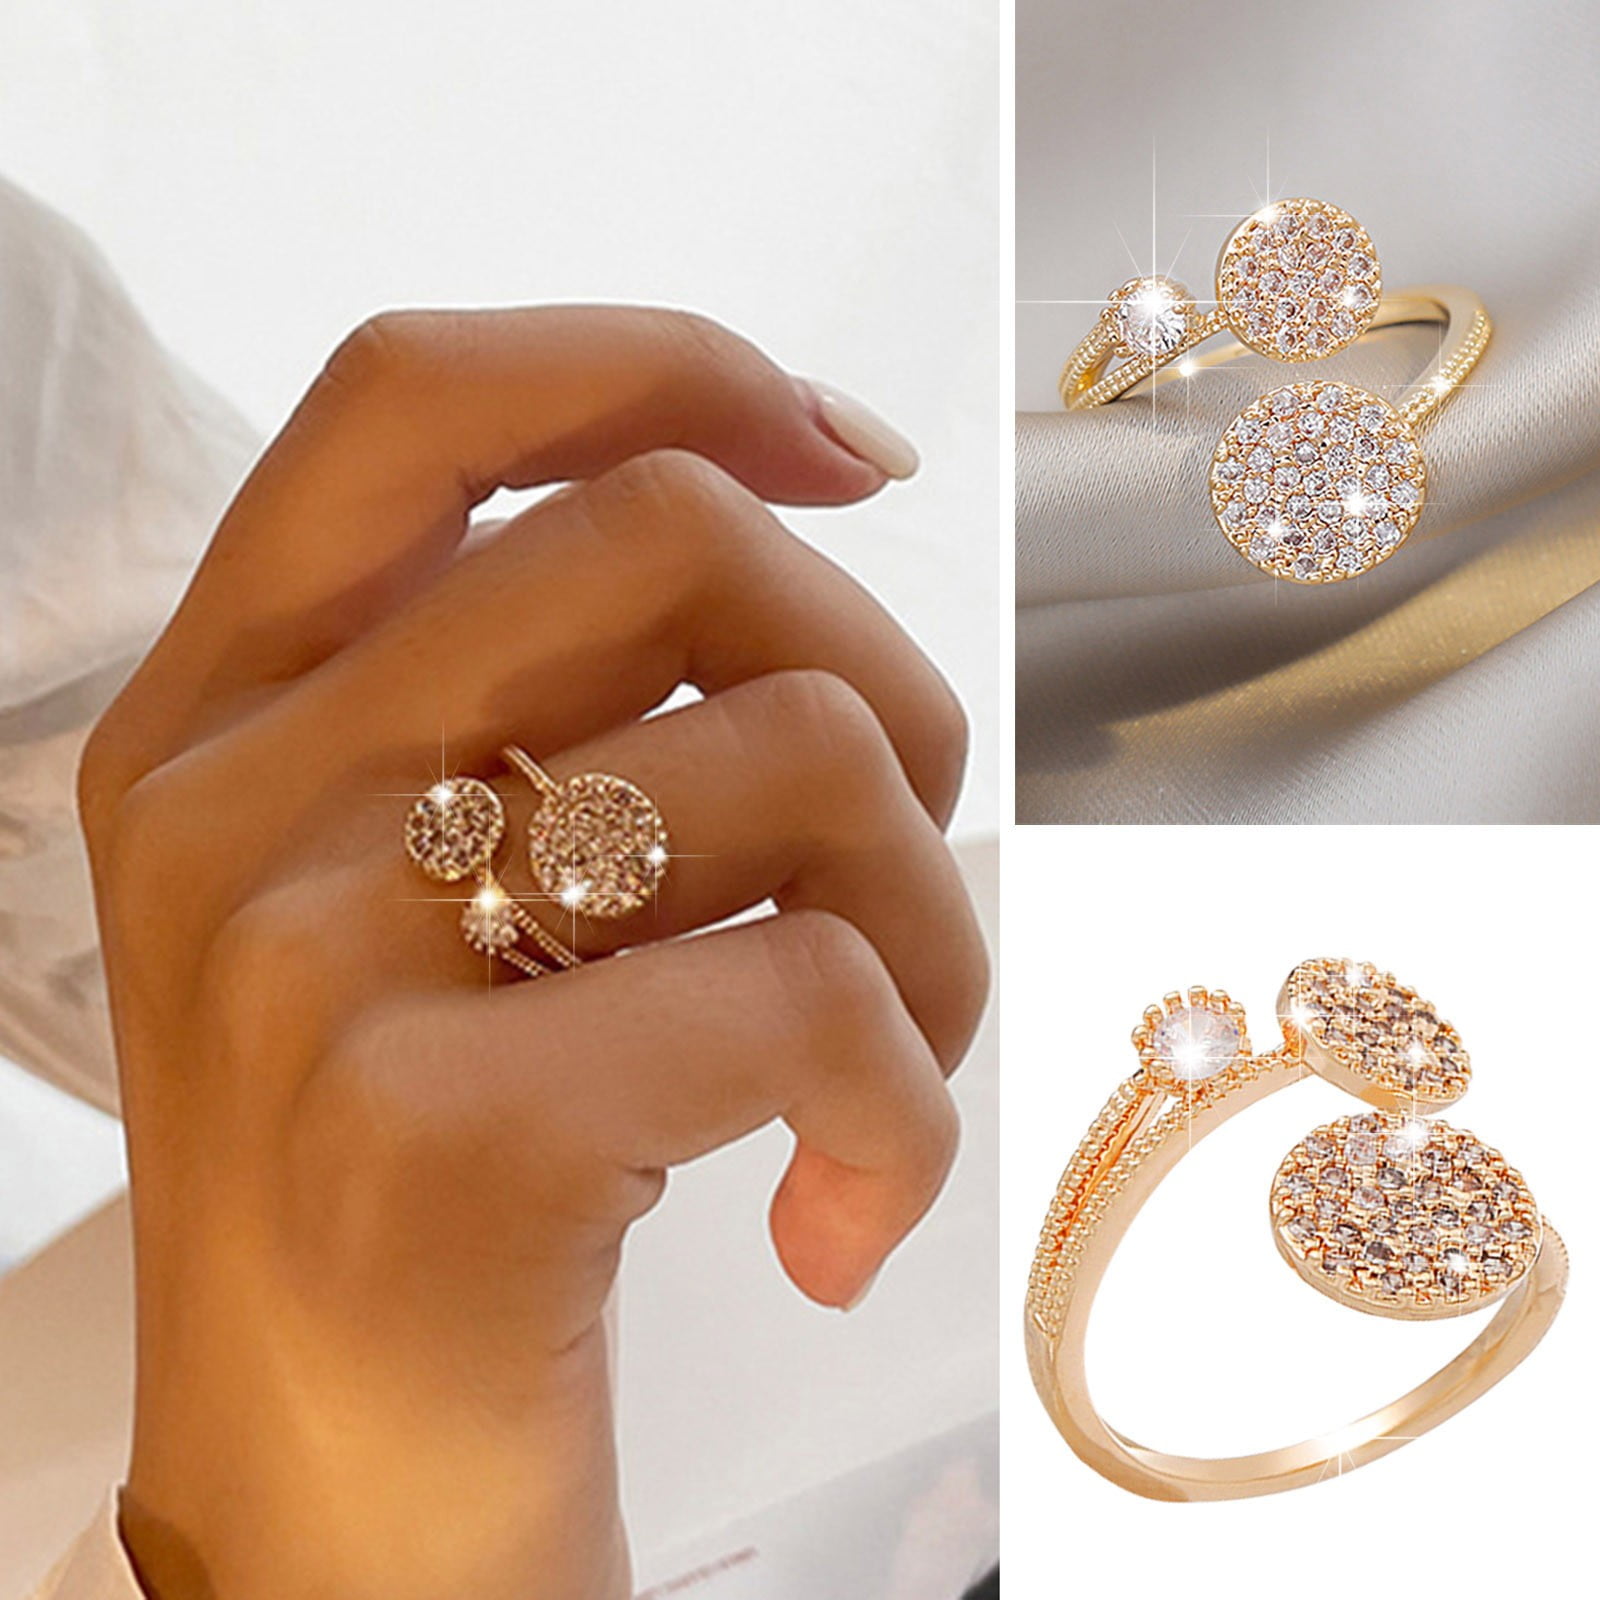 Buy GOLD PLATED RING WITH BIG ROUND DESIGN at Amazon.in